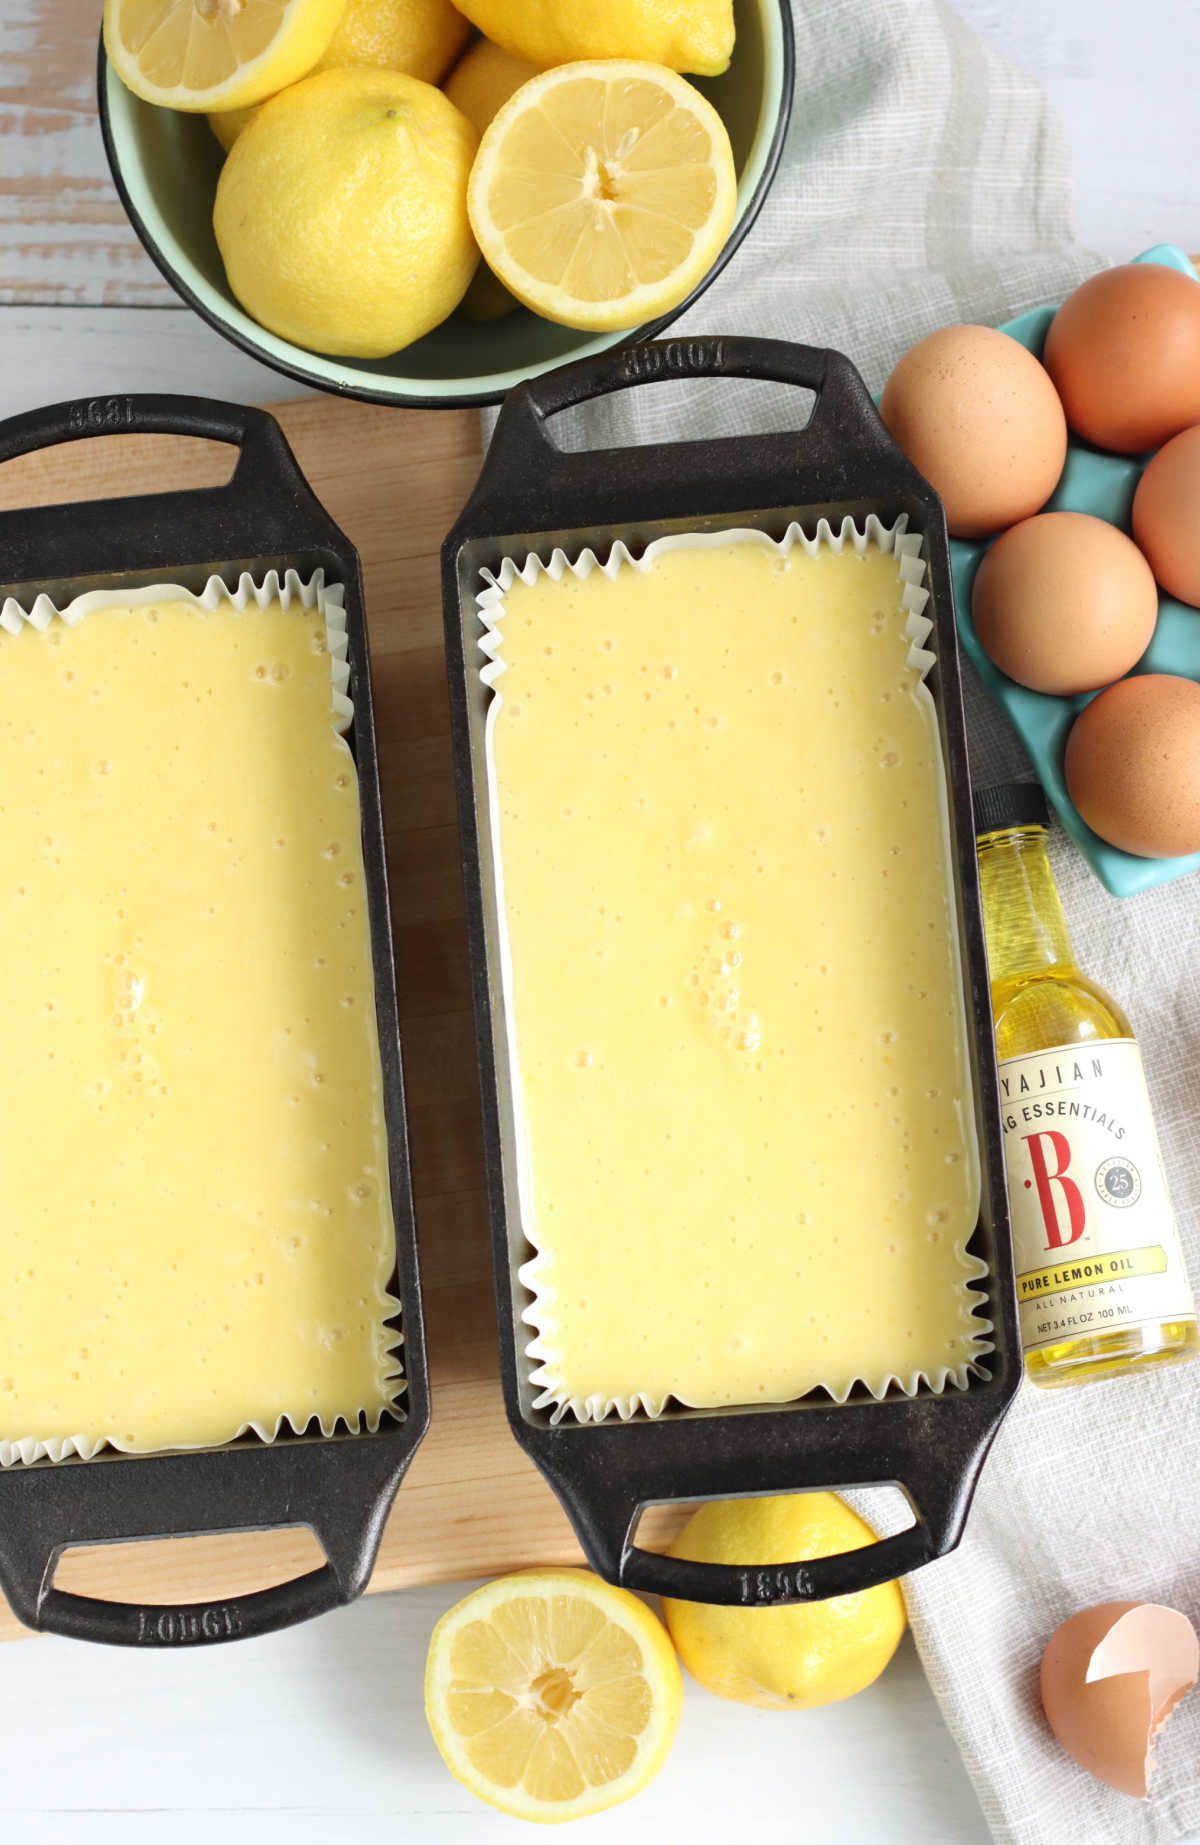 Lemon cake batter in two cast iron loaf pans on wooden cutting board, lemons around.